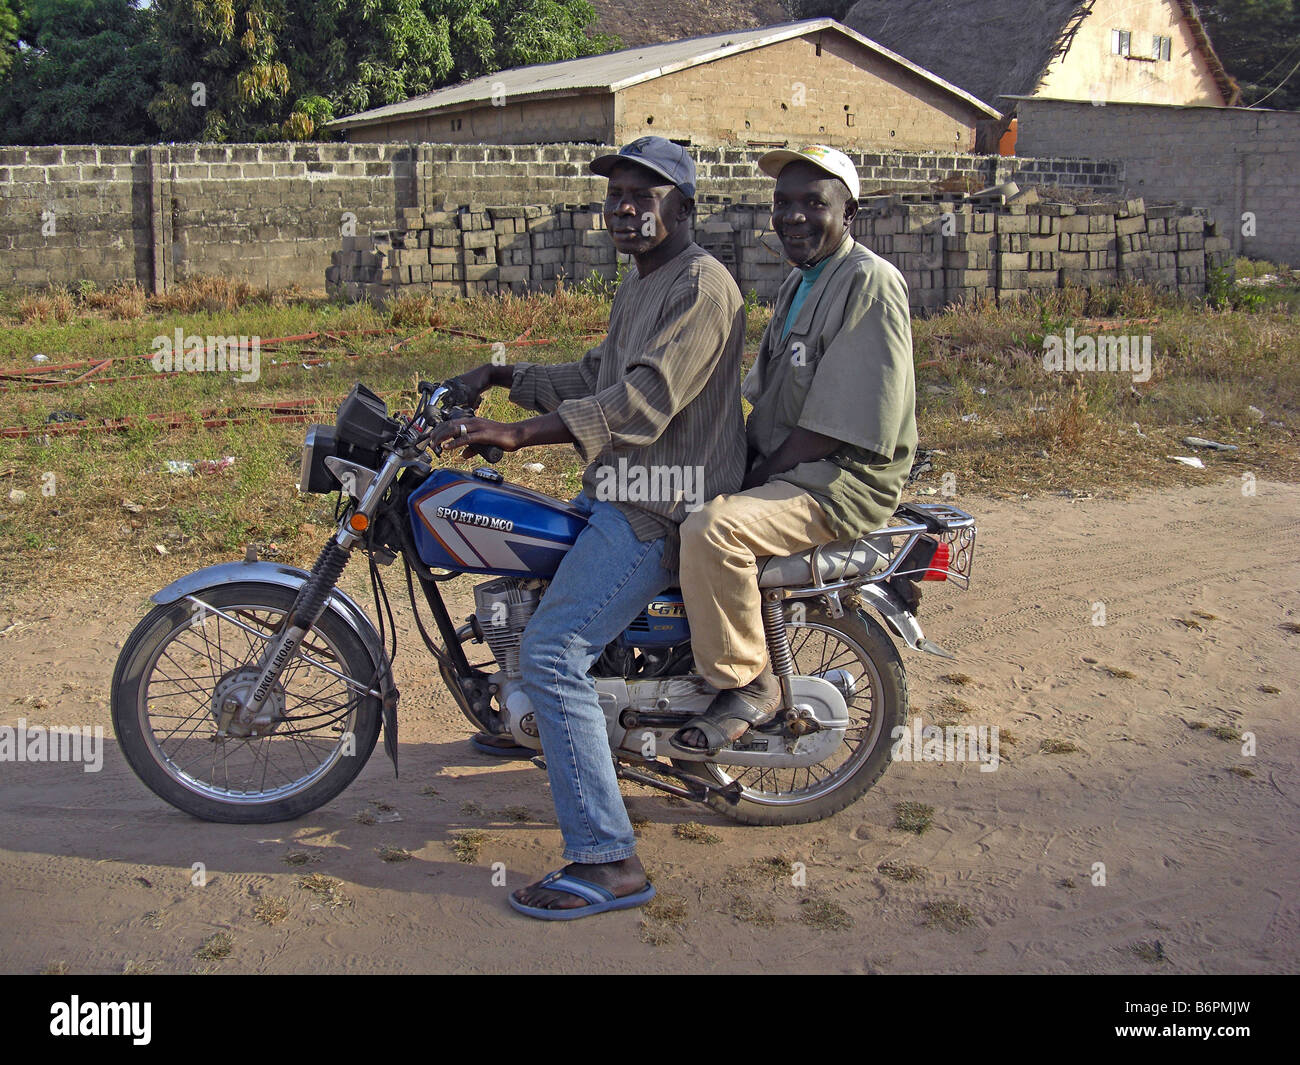 Two men on a motobike with no helmets in The Gambia, West africa Stock Photo